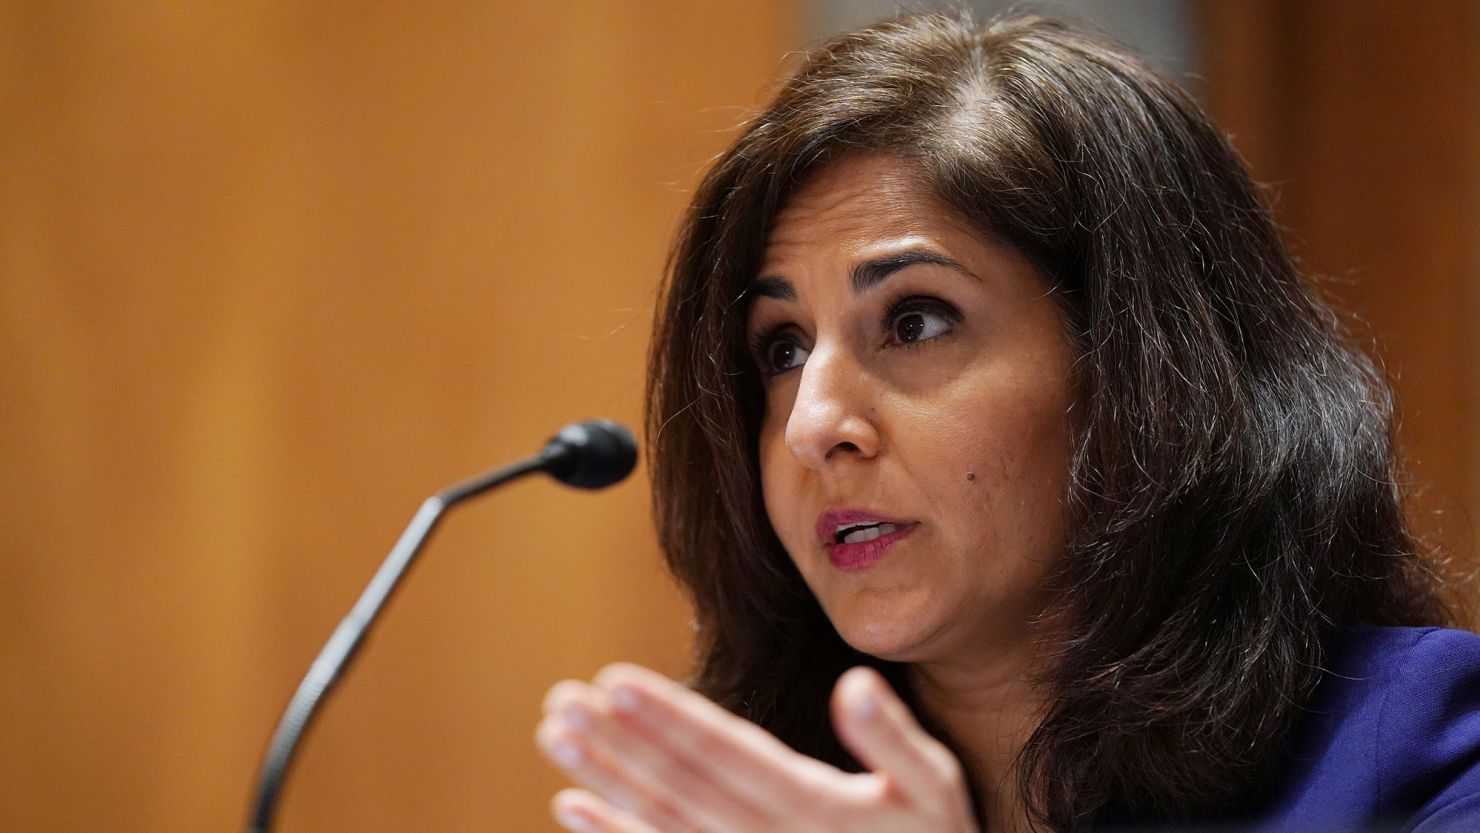 Neera Tanden, then-nominee for Director of the Office of Management and Budget, testifies at her confirmation hearing before the Senate Homeland Security and Government Affairs committee in February 2021 at the US Capitol in Washington, DC. 